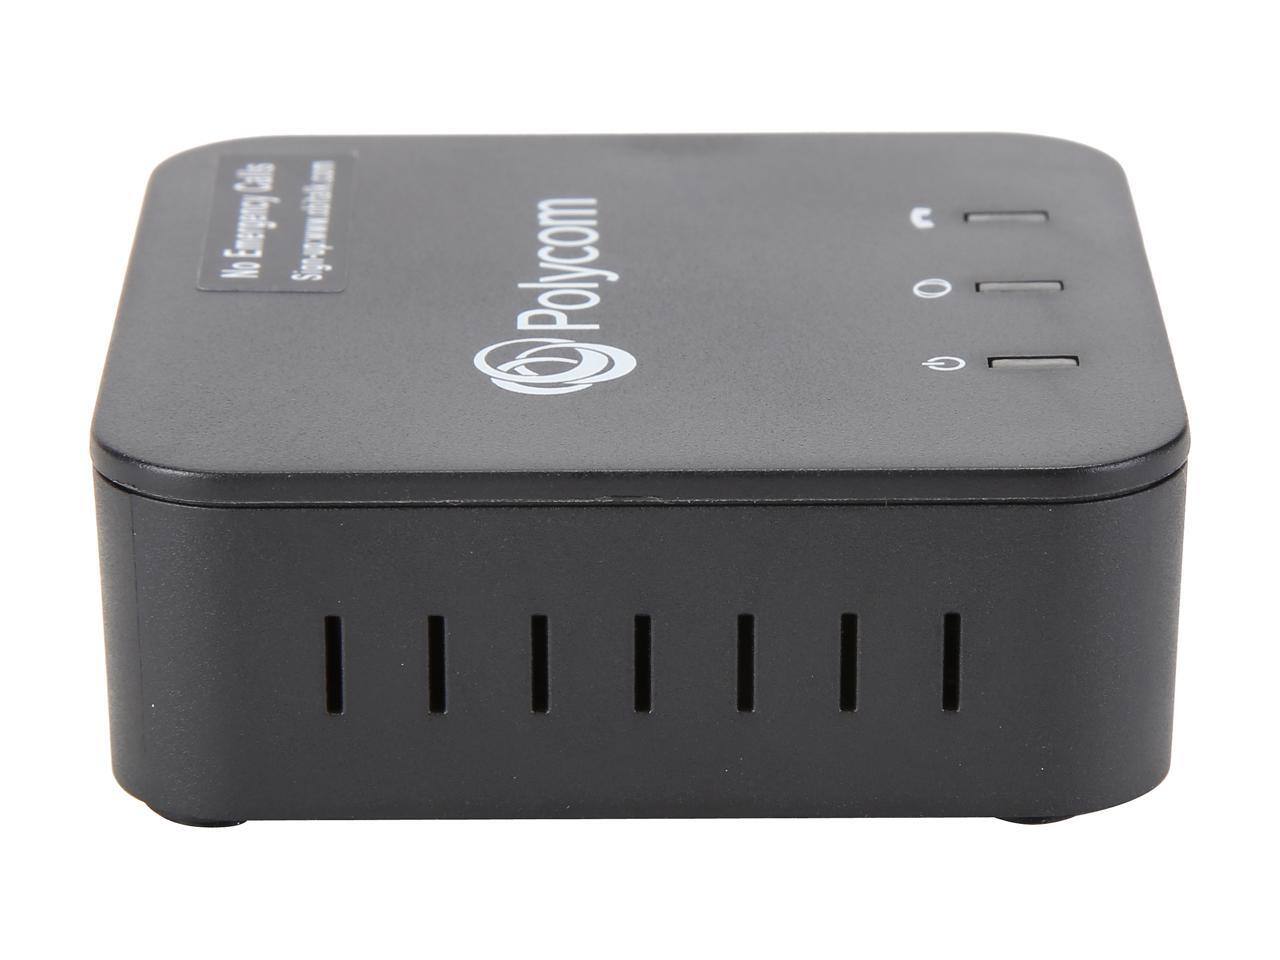 Polycom OBi200 VoIP Telephone Adapter with Google Voice & SIP with Free Shipping $39.99